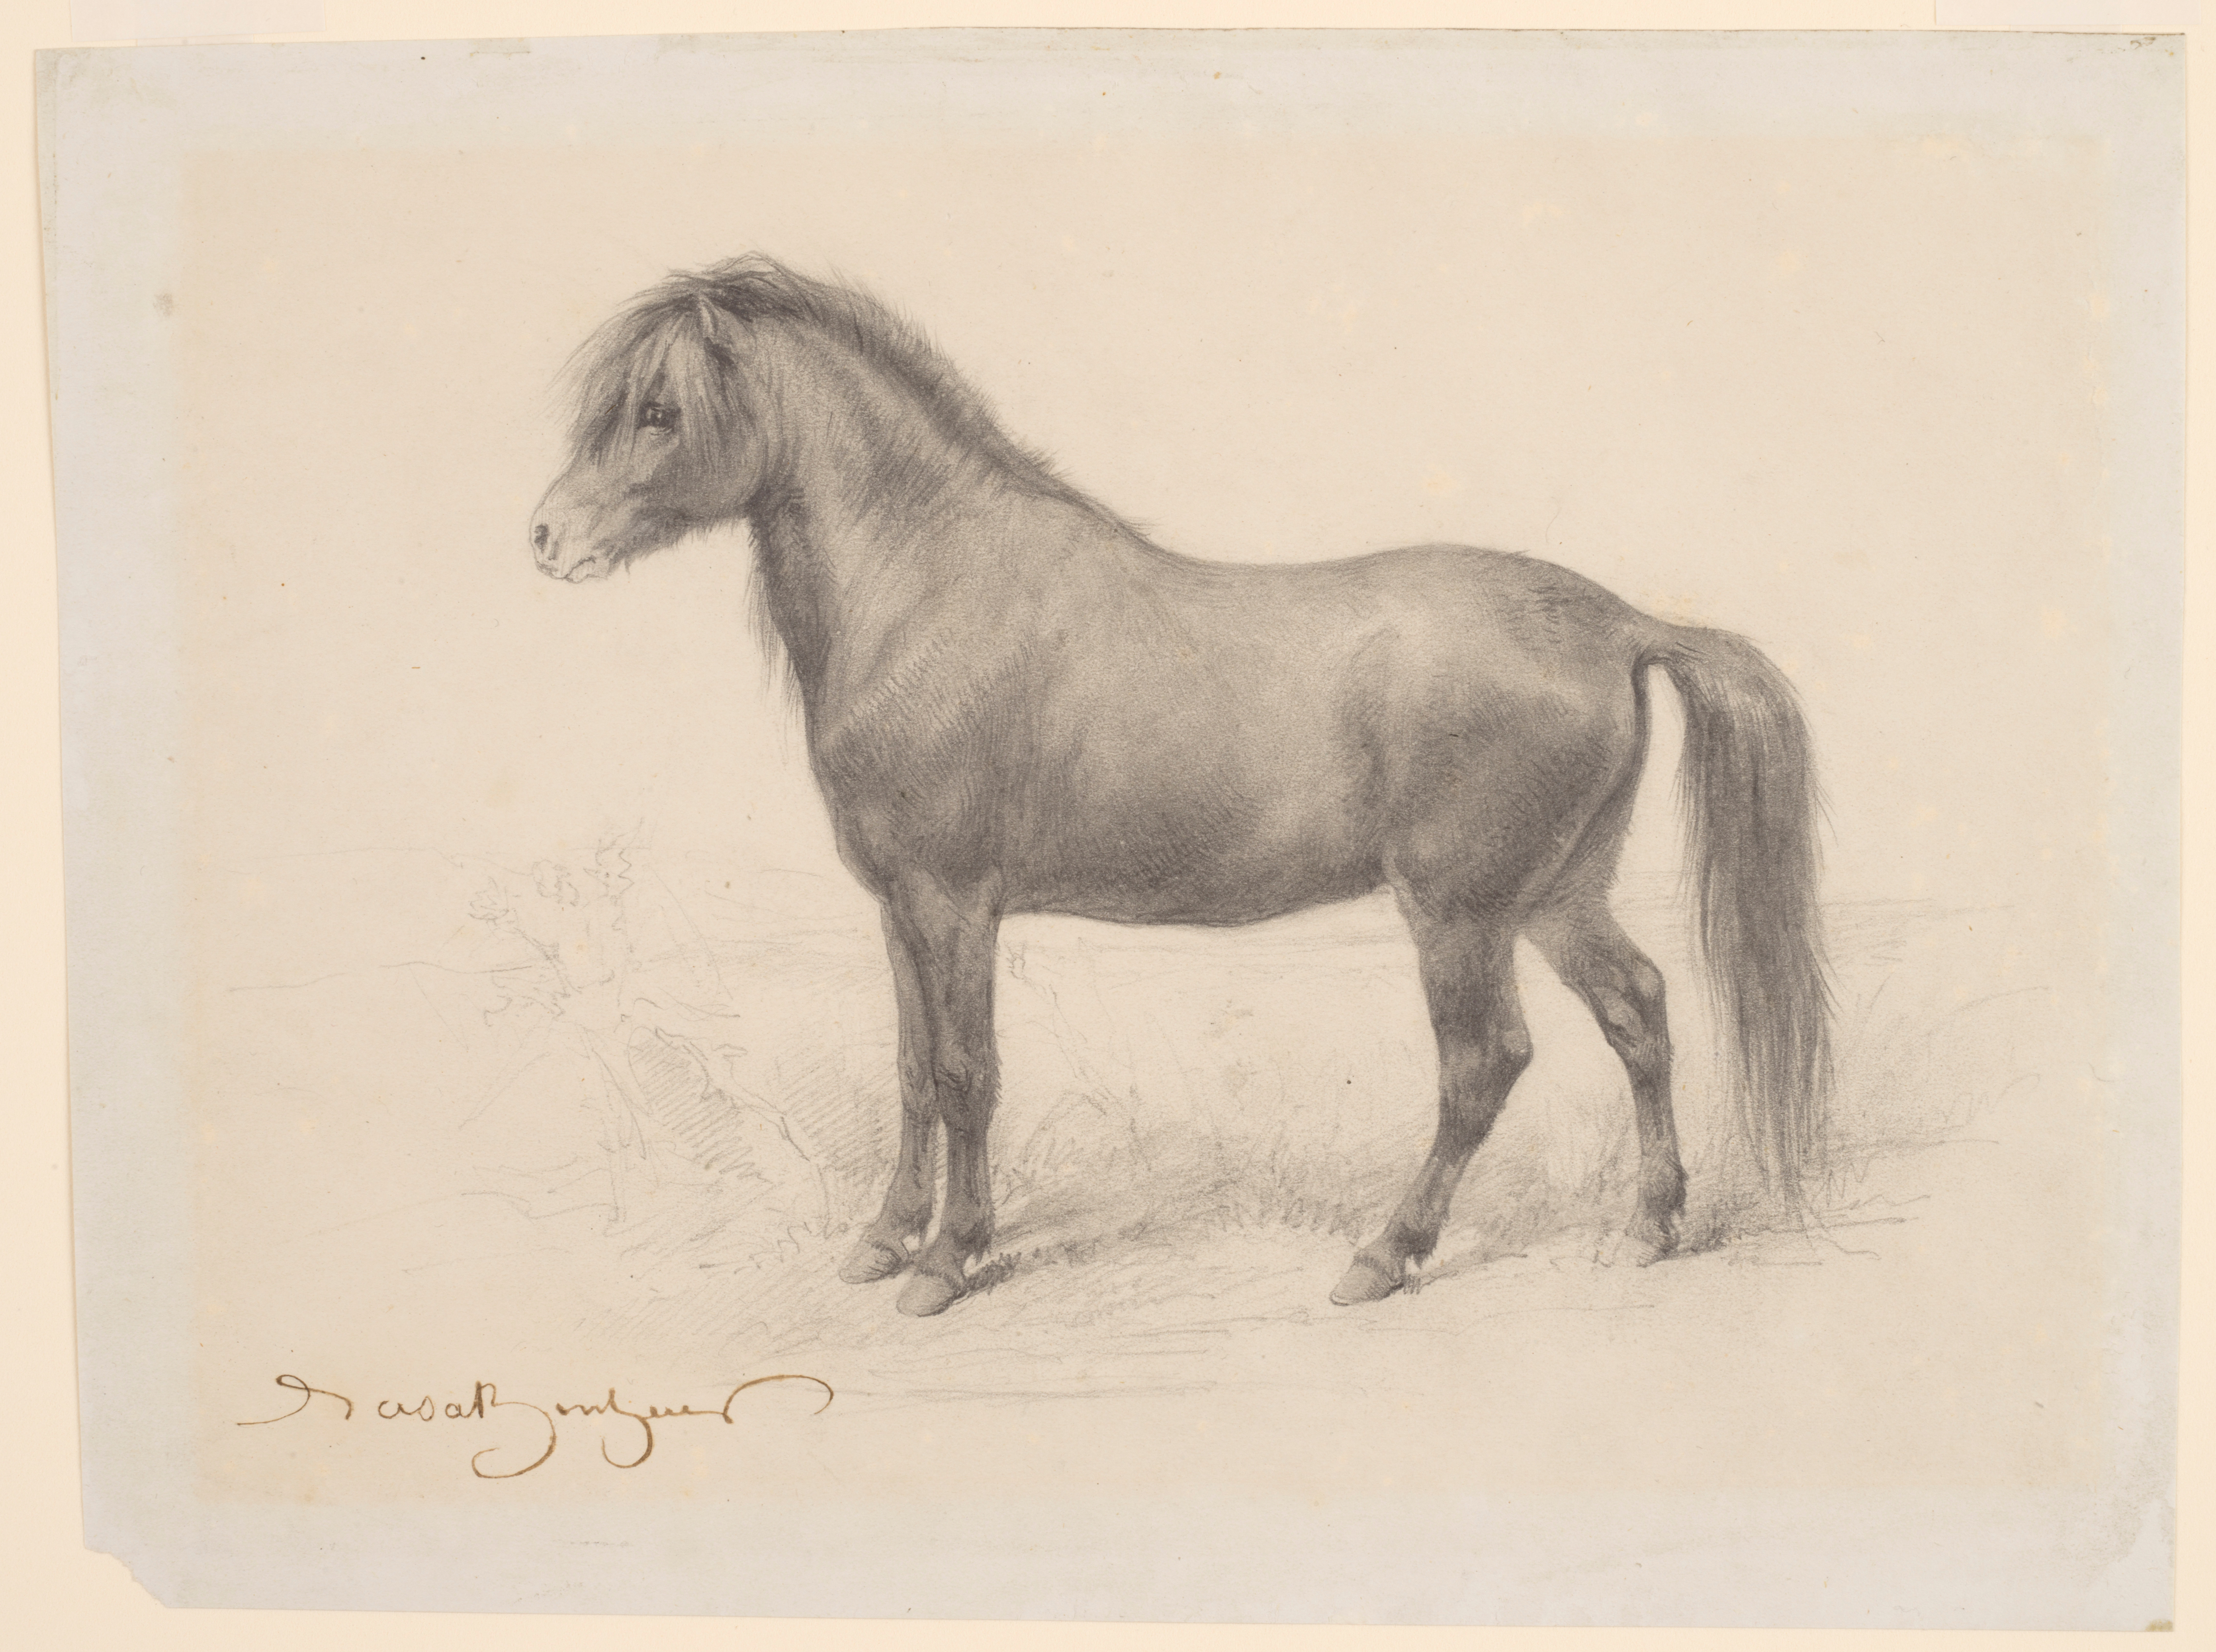 A pencil sketch of a pony in a background by French 19th century artist Rosa Bonheur.